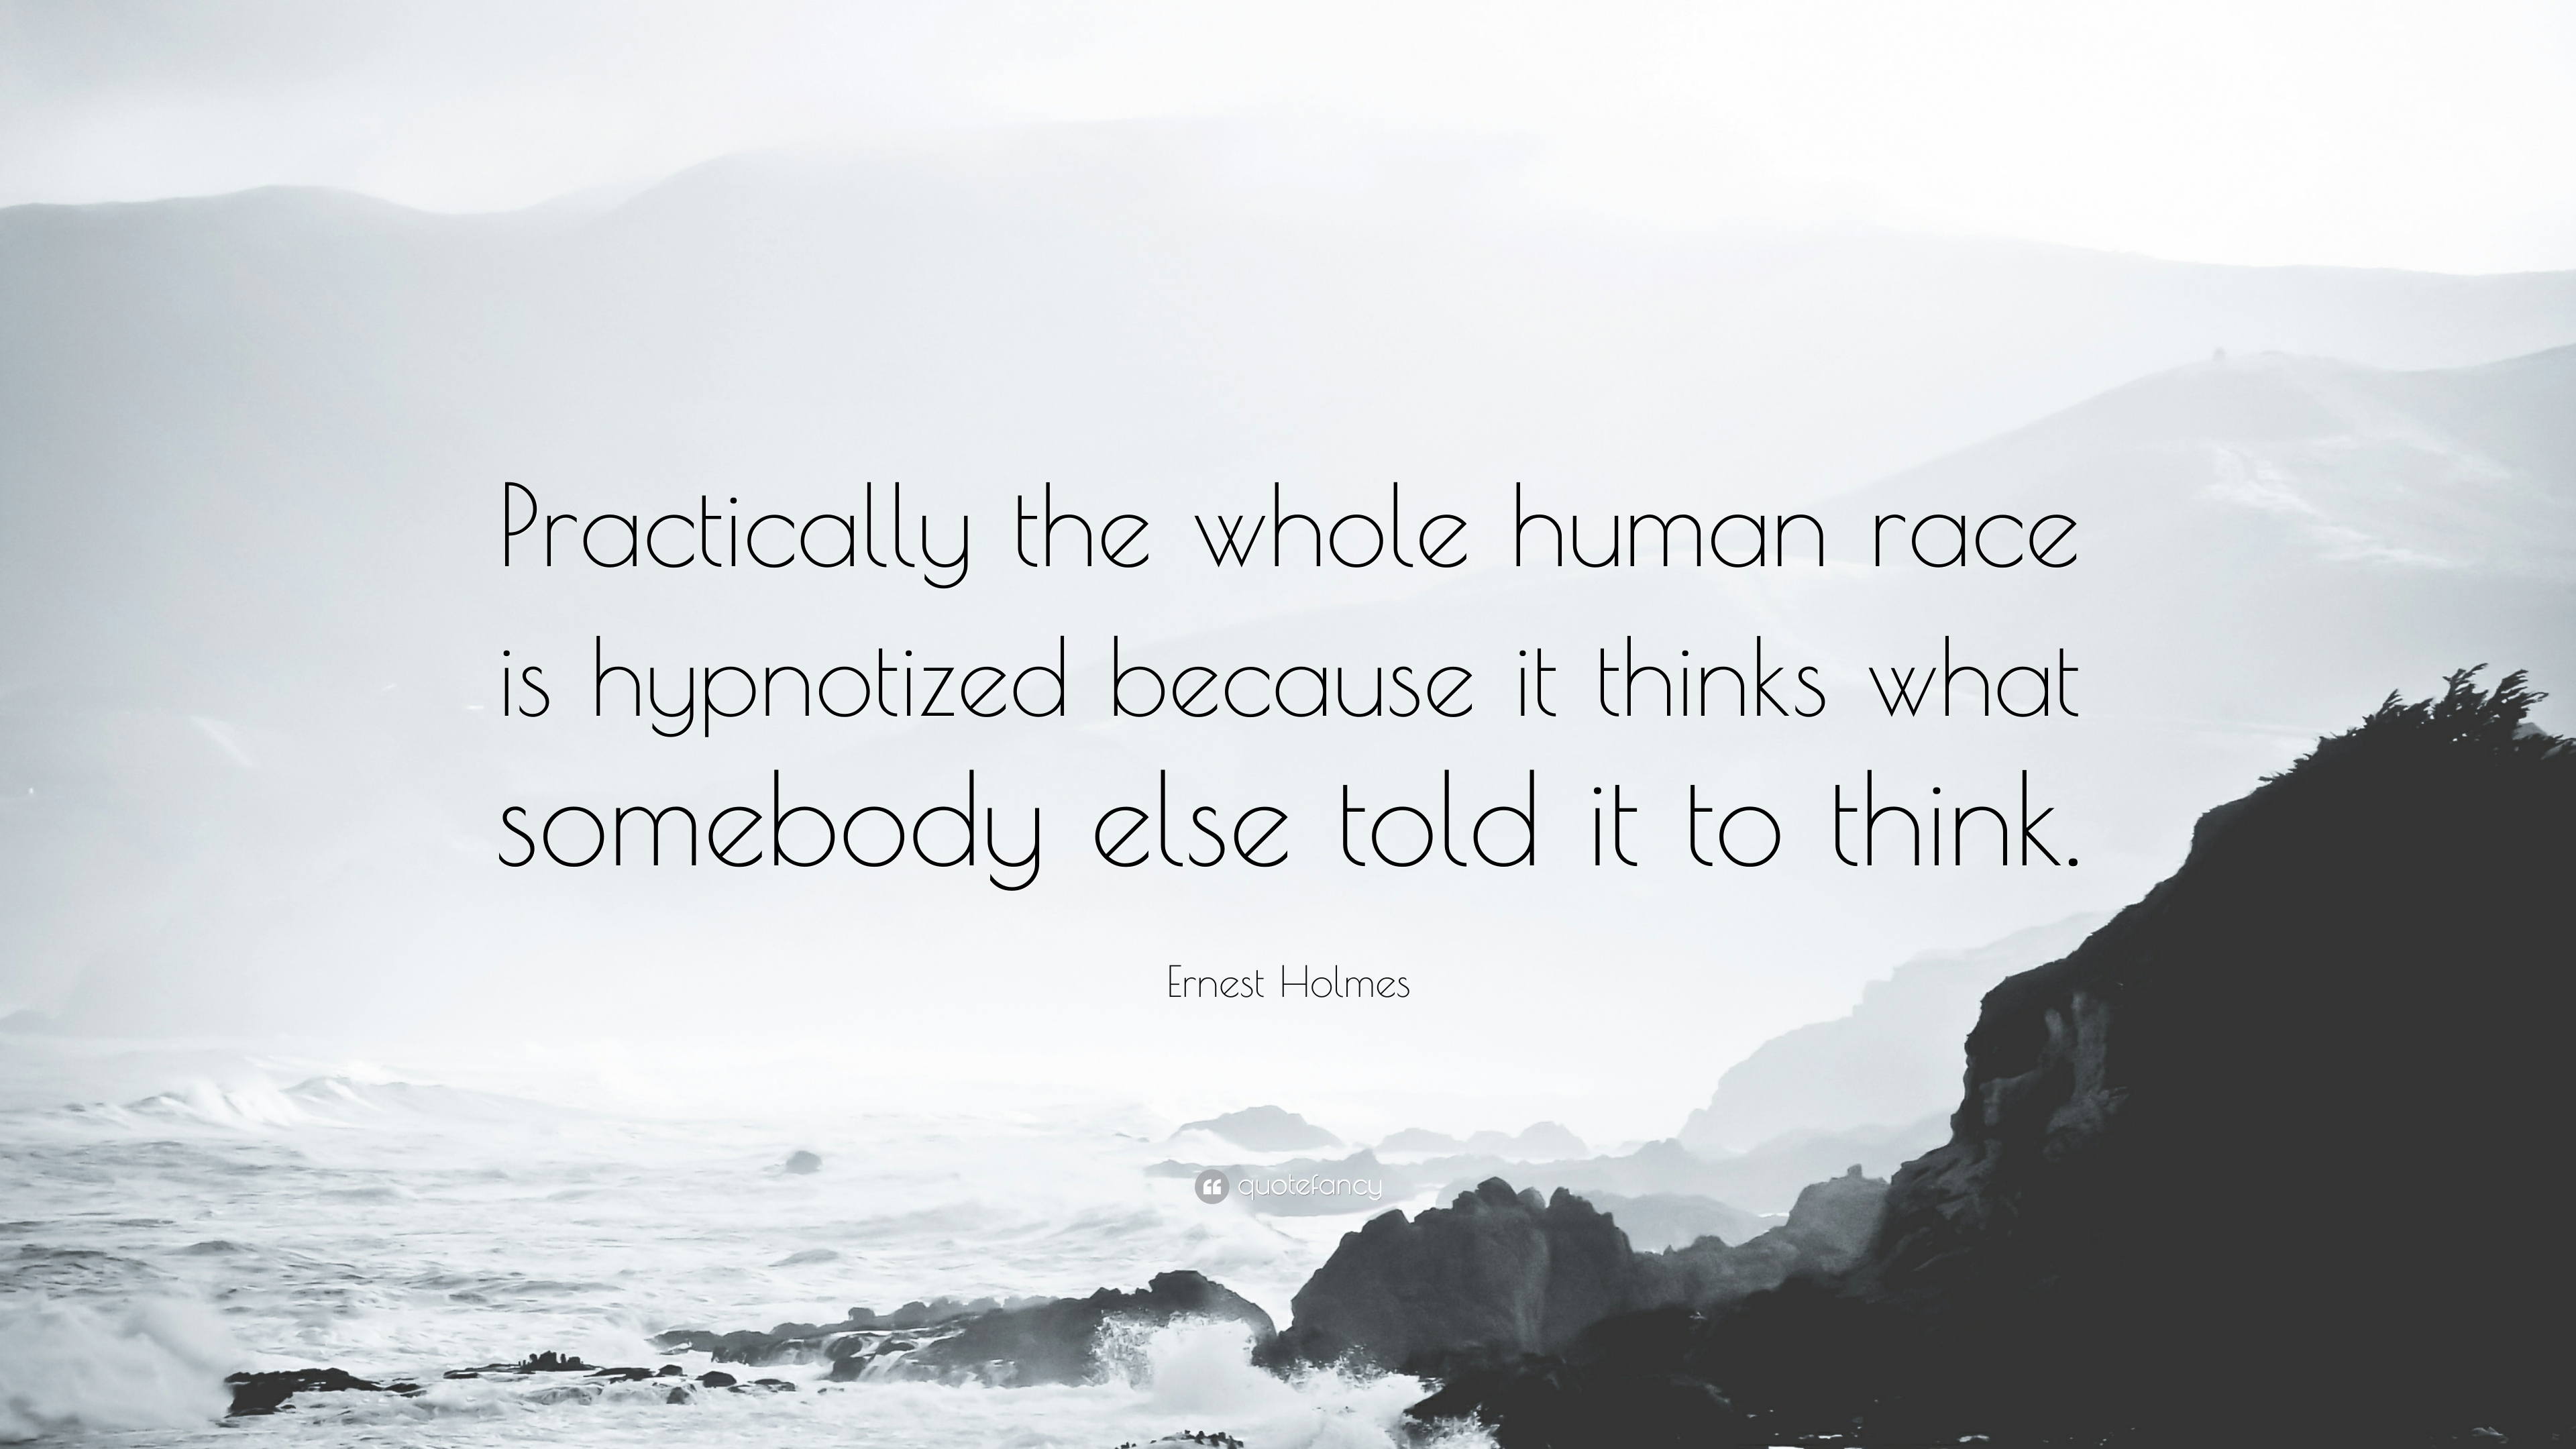 Ernest Holmes Quote: “Practically the whole human race is hypnotized